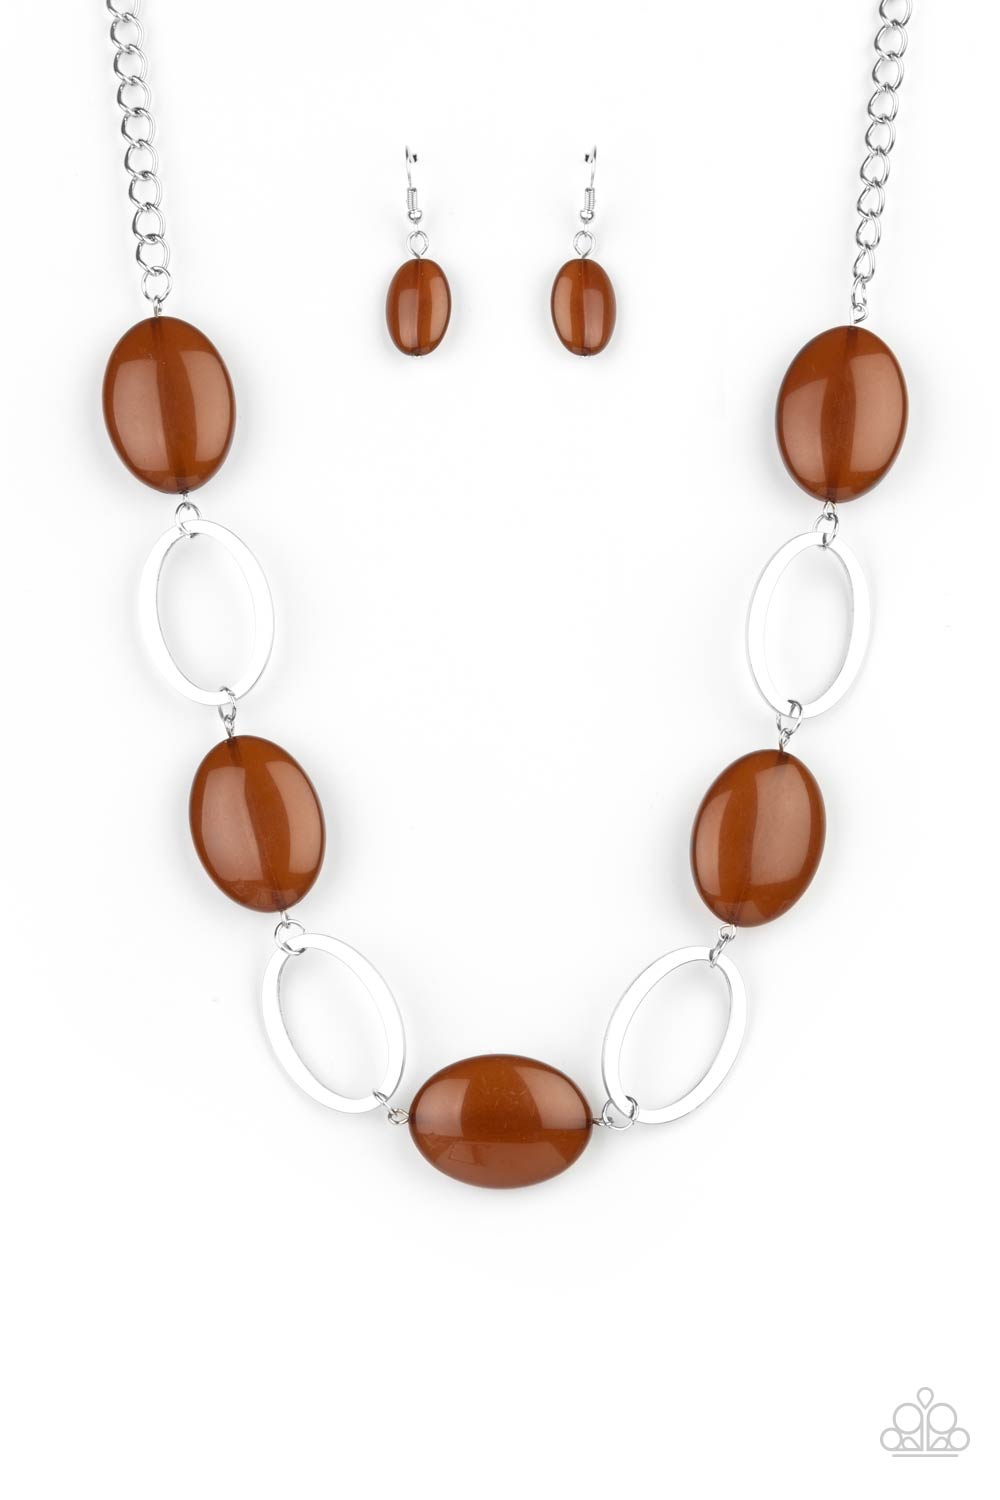 Beachside Boardwalk Brown Necklace - Paparazzi Accessories  Shiny silver ovals and glassy brown oval beads delicately link across the chest, creating a whimsical pop of color. Features an adjustable clasp closure.  All Paparazzi Accessories are lead free and nickel free!  Sold as one individual necklace. Includes one pair of matching earrings.